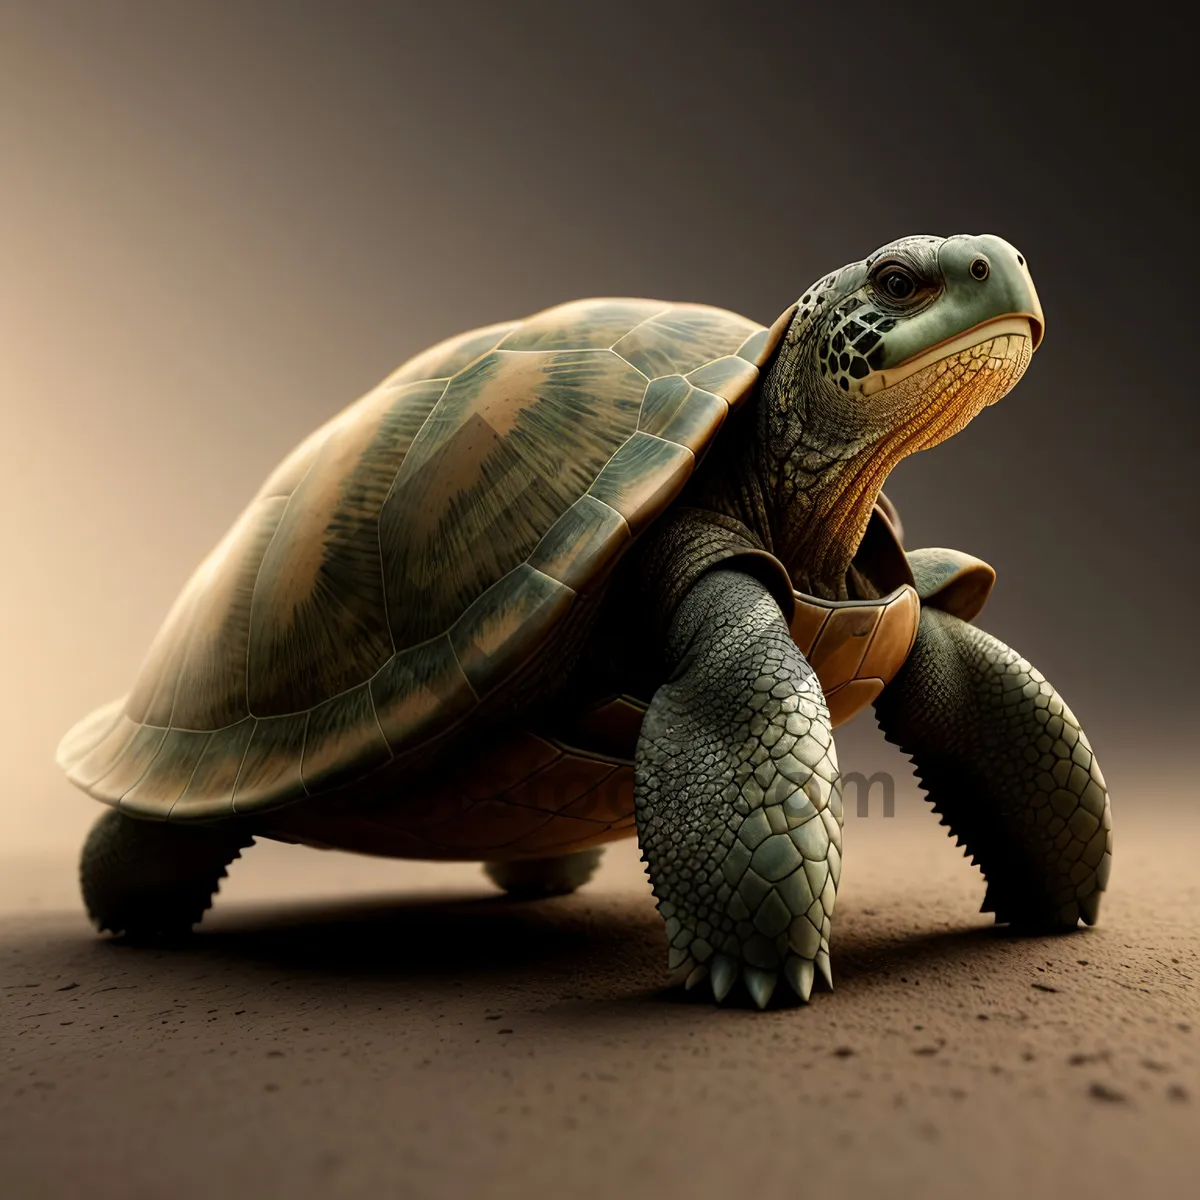 Picture of Protected Shell: A Slow-Moving Terrapin in the Wild